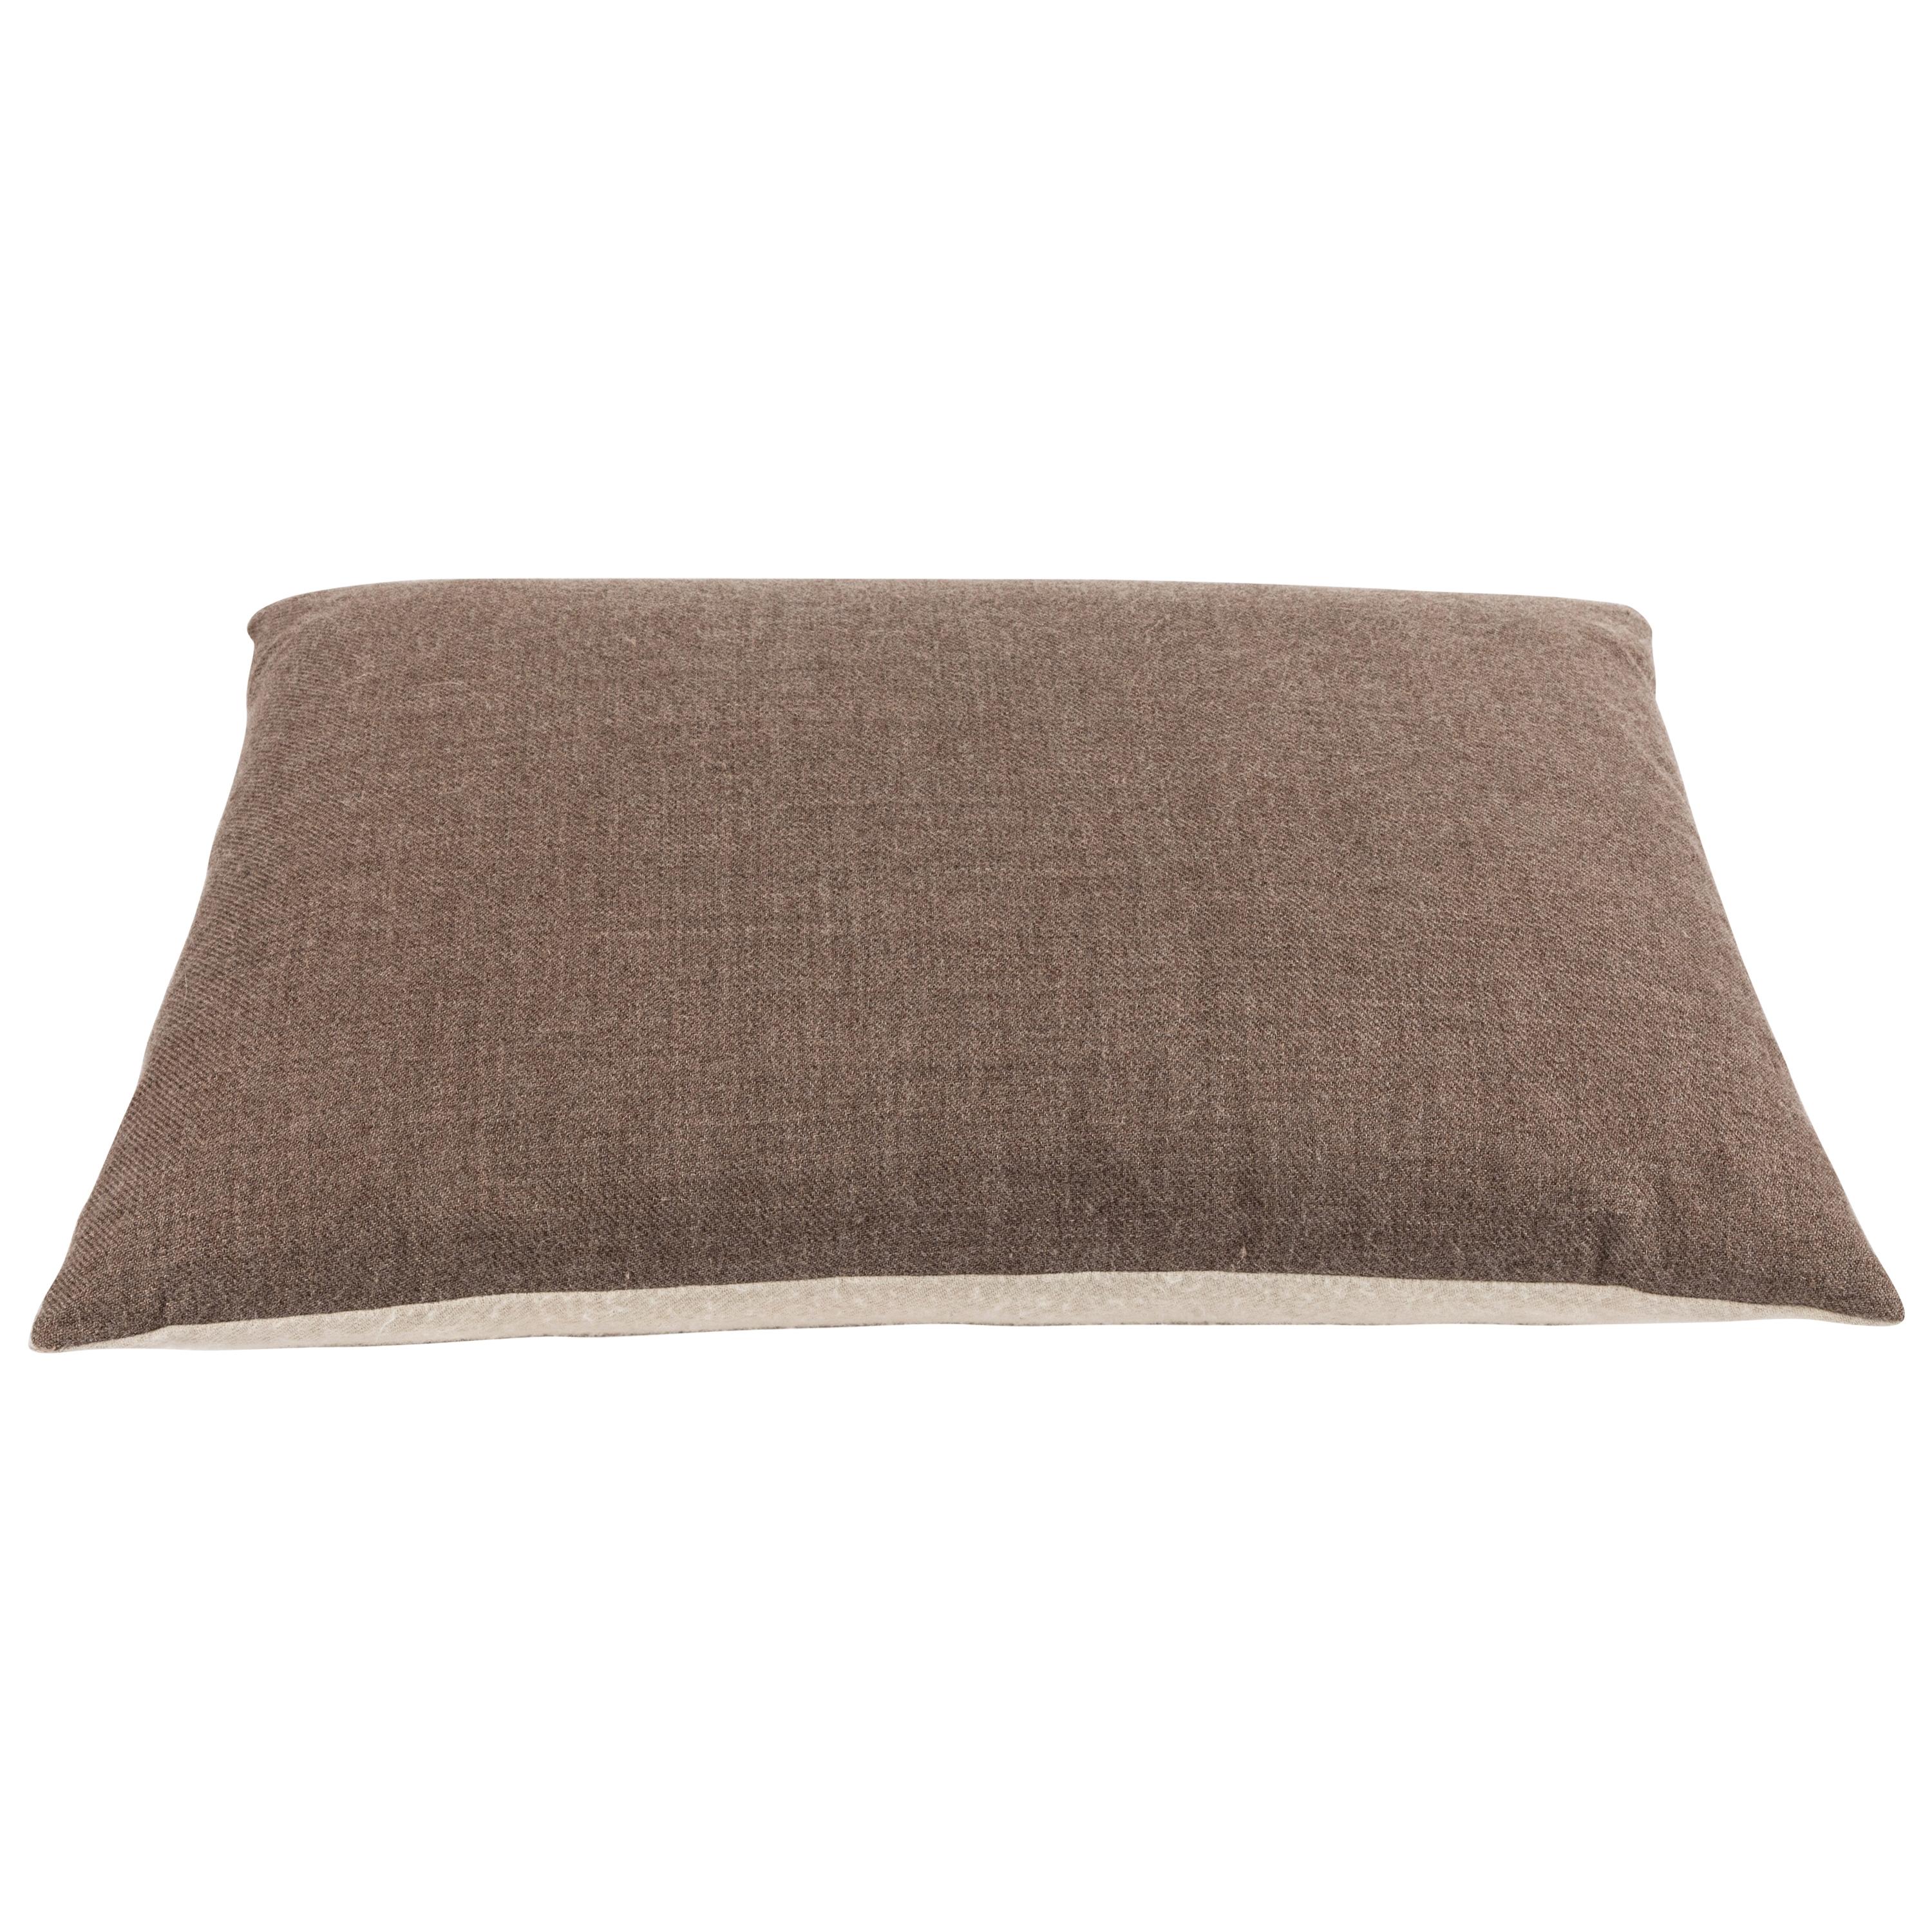 Italian Cream and Putty Cashmere Lumbar Pillow For Sale